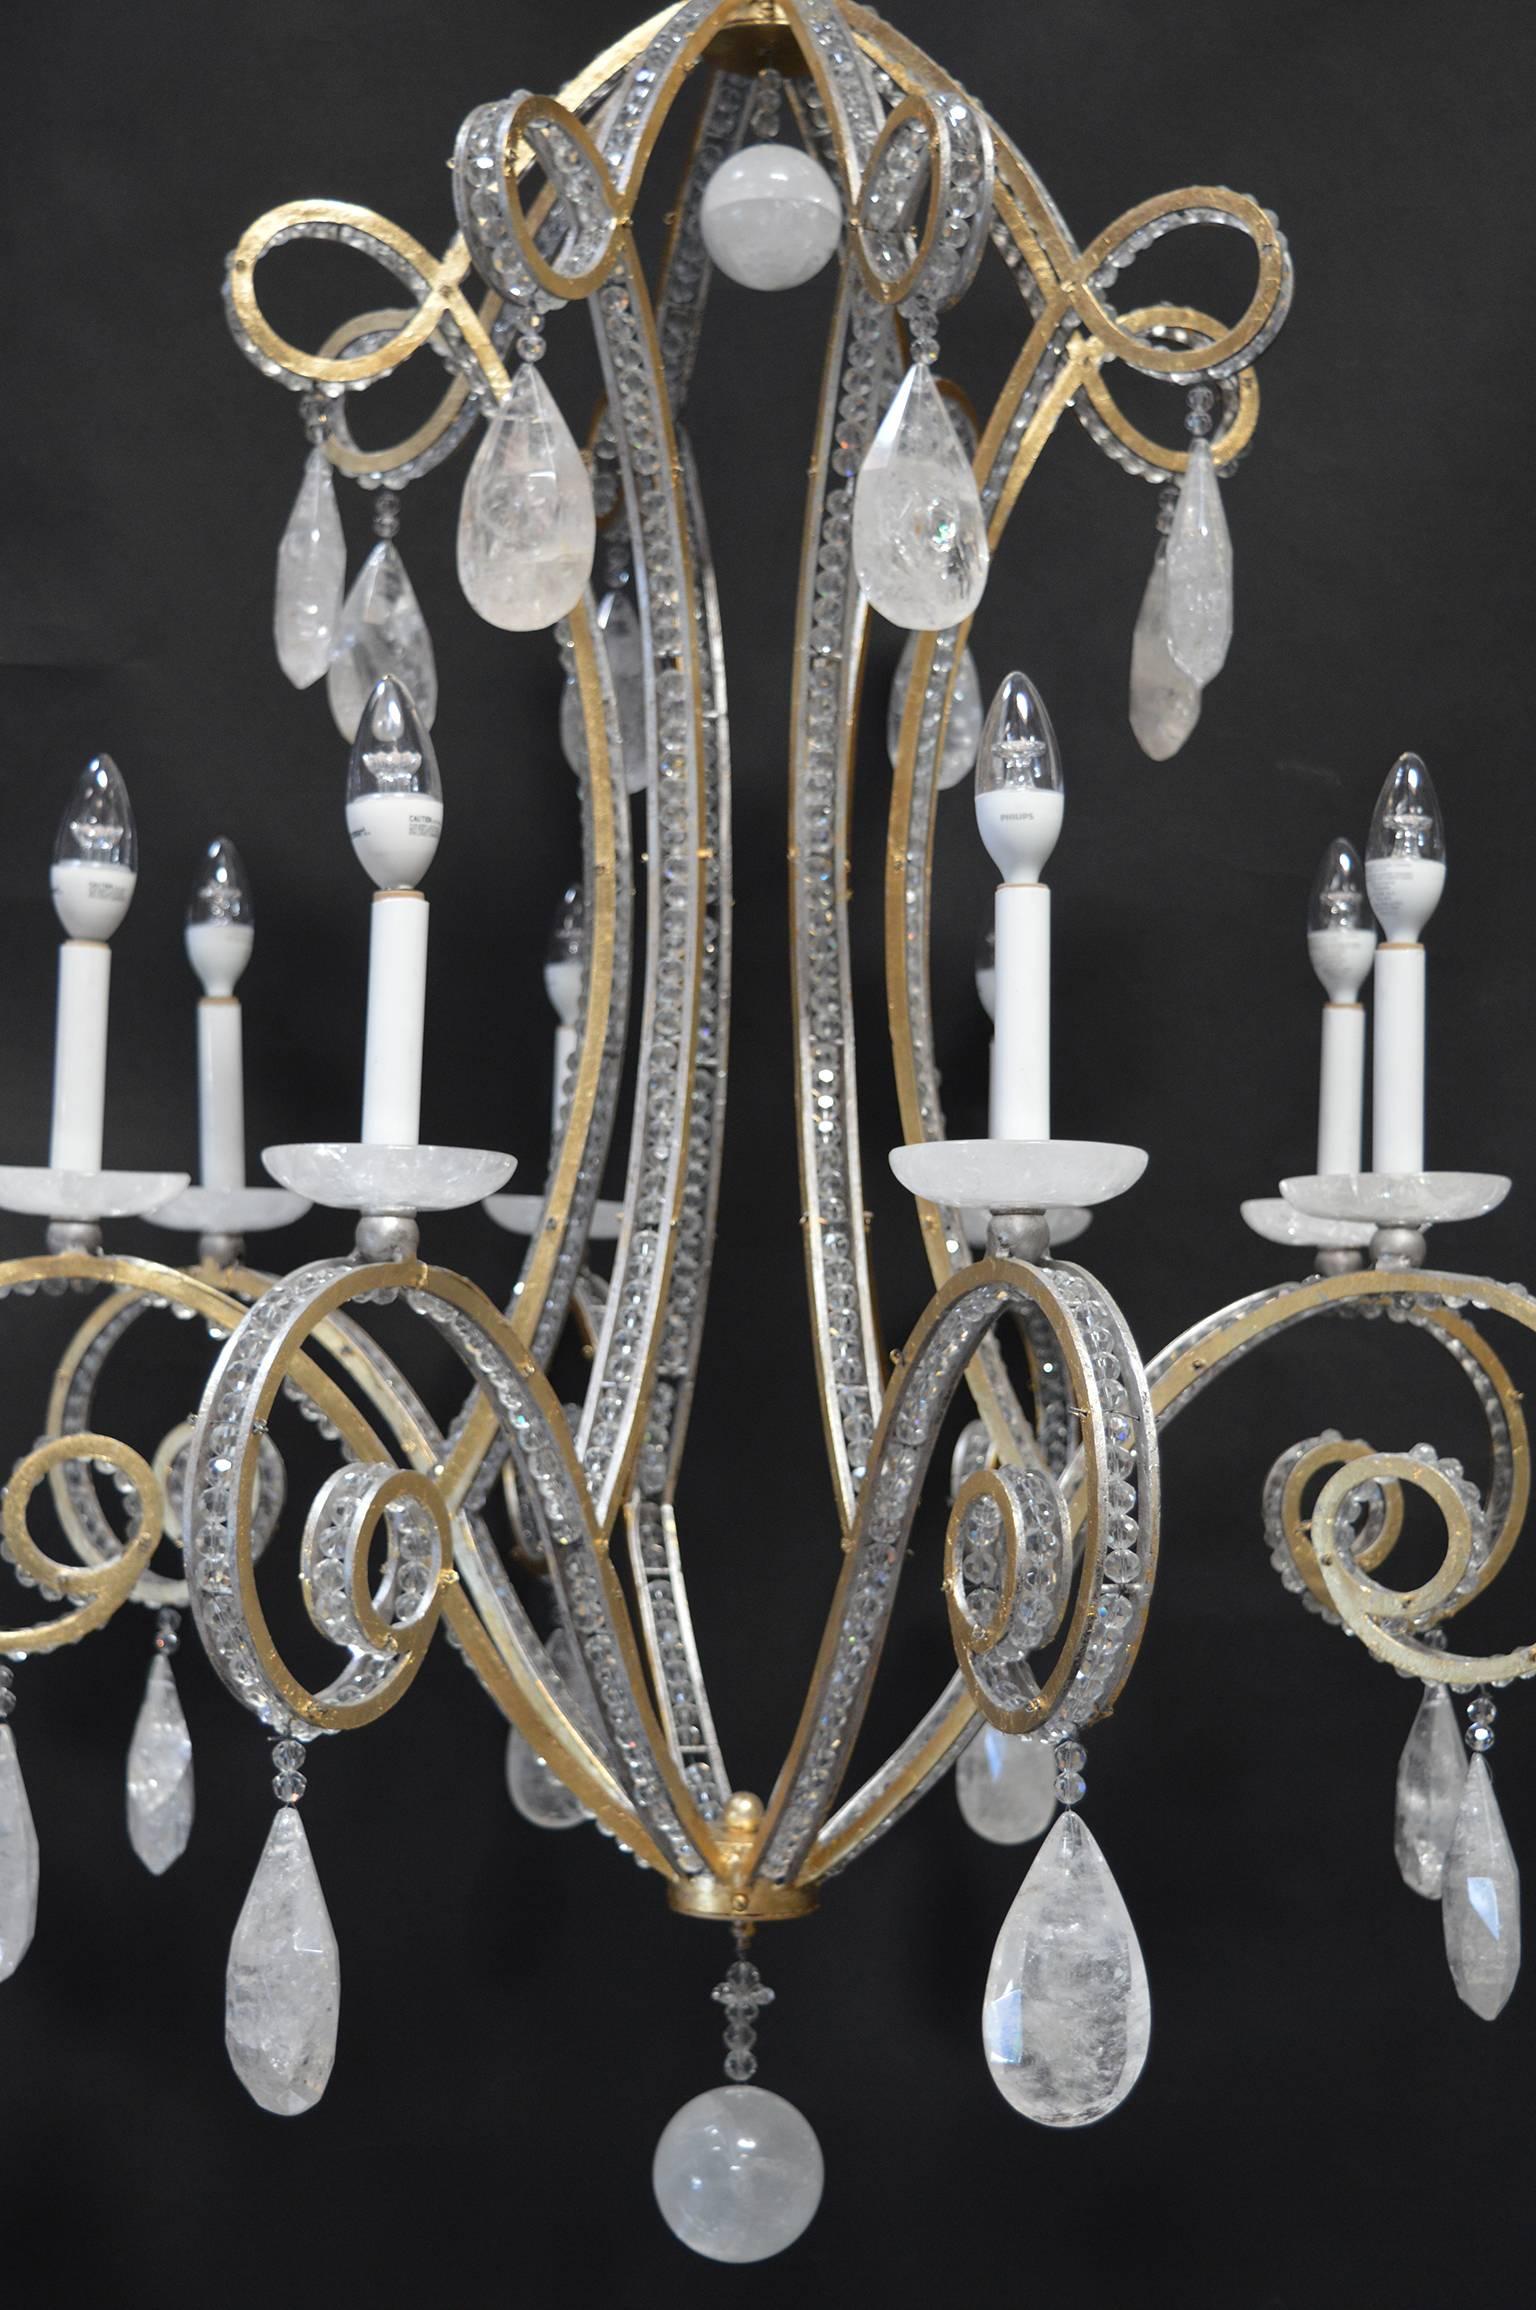 Rock crystal and gold leafed iron. Silver leafing on the outer edges along side the crystal beading embedded in the arms. 
The chandelier was designed and made in Italy, but the rock crystal was mined in Brazil.